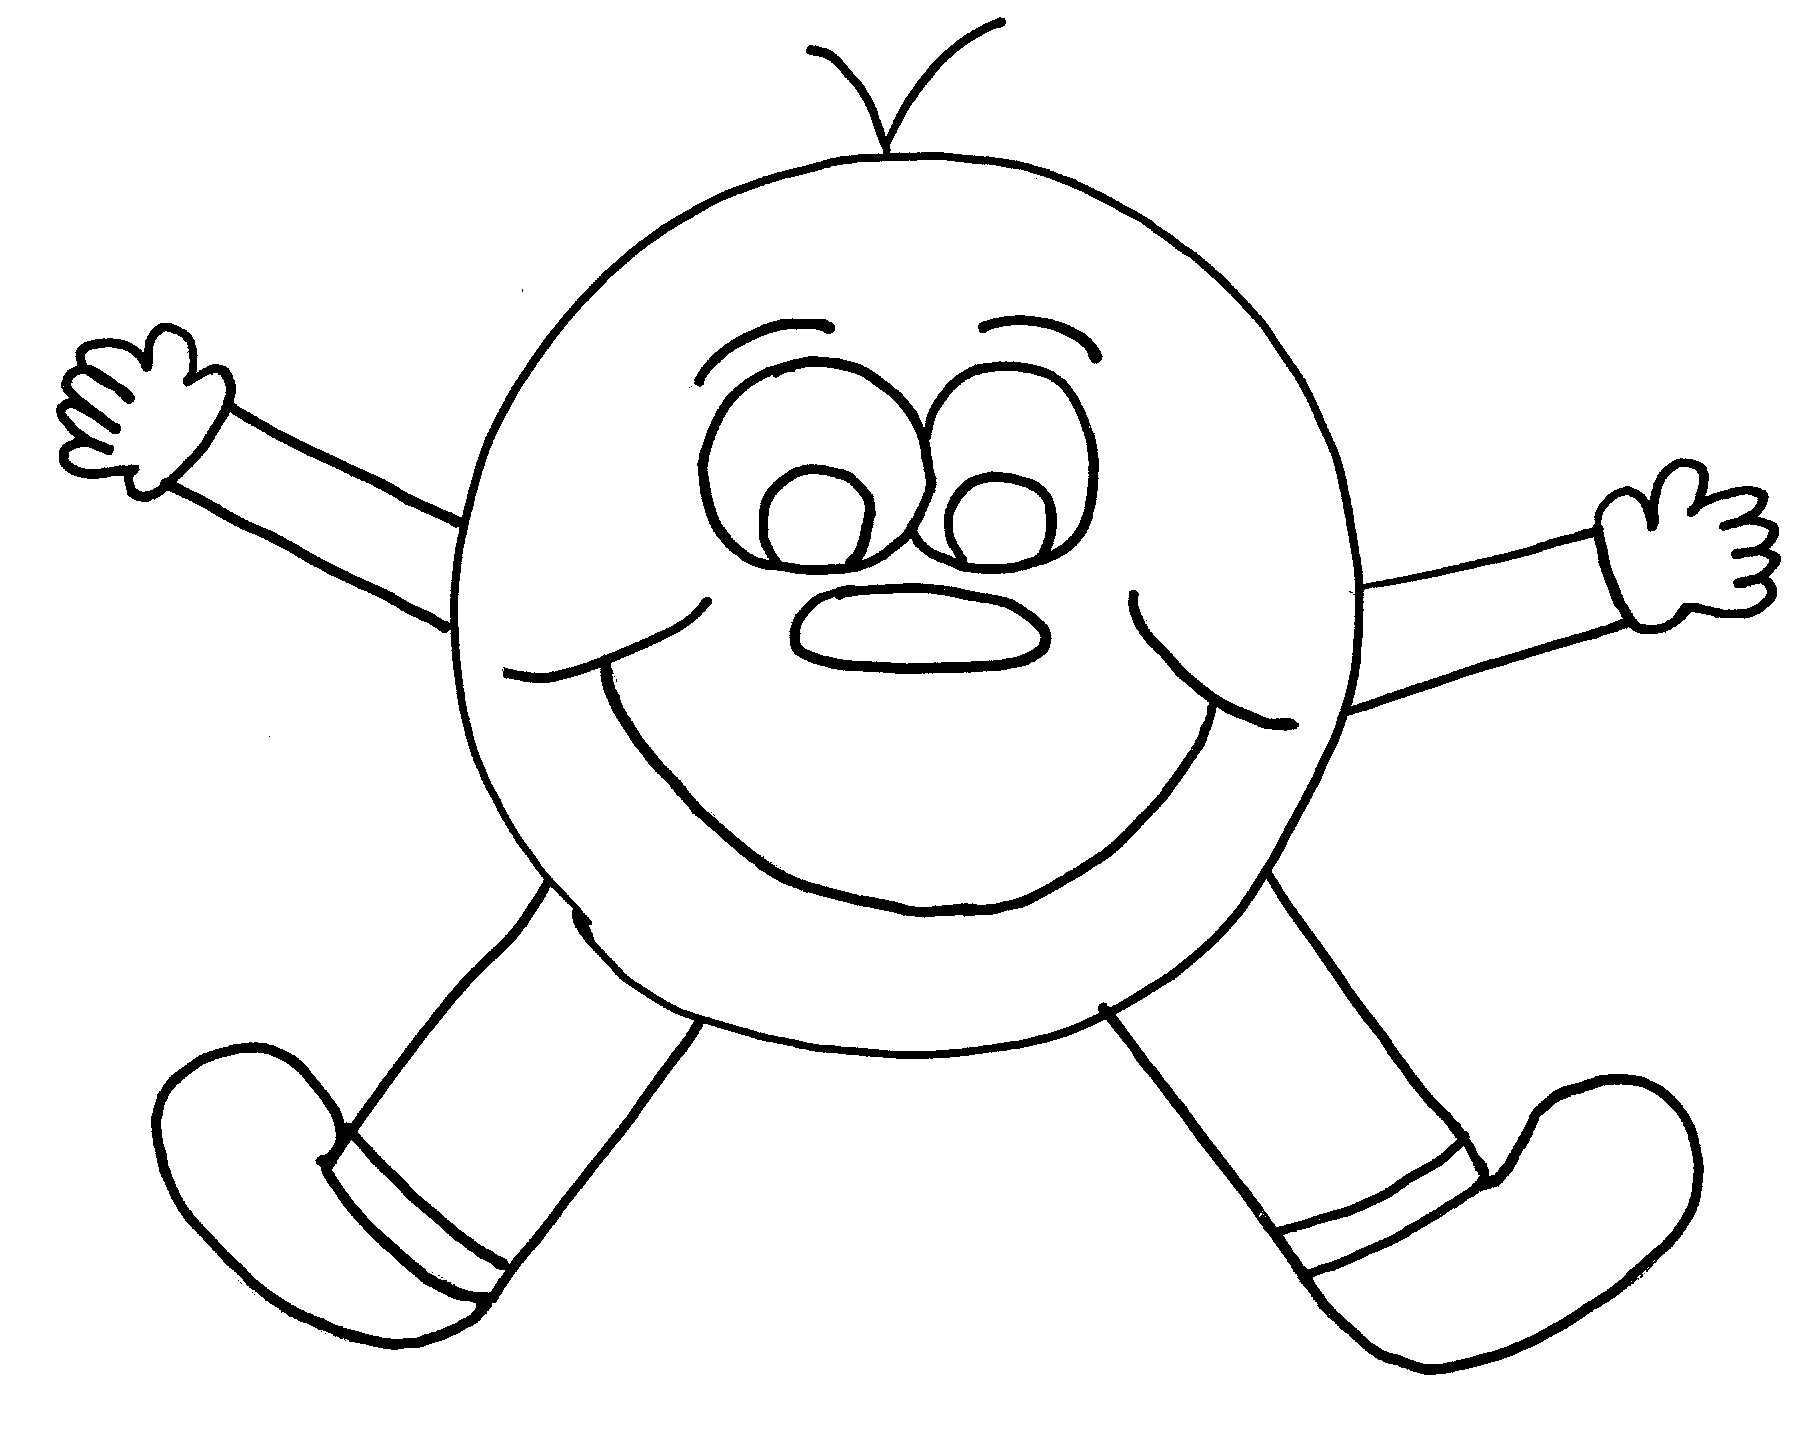 Coloring Pages Of Smiley Face